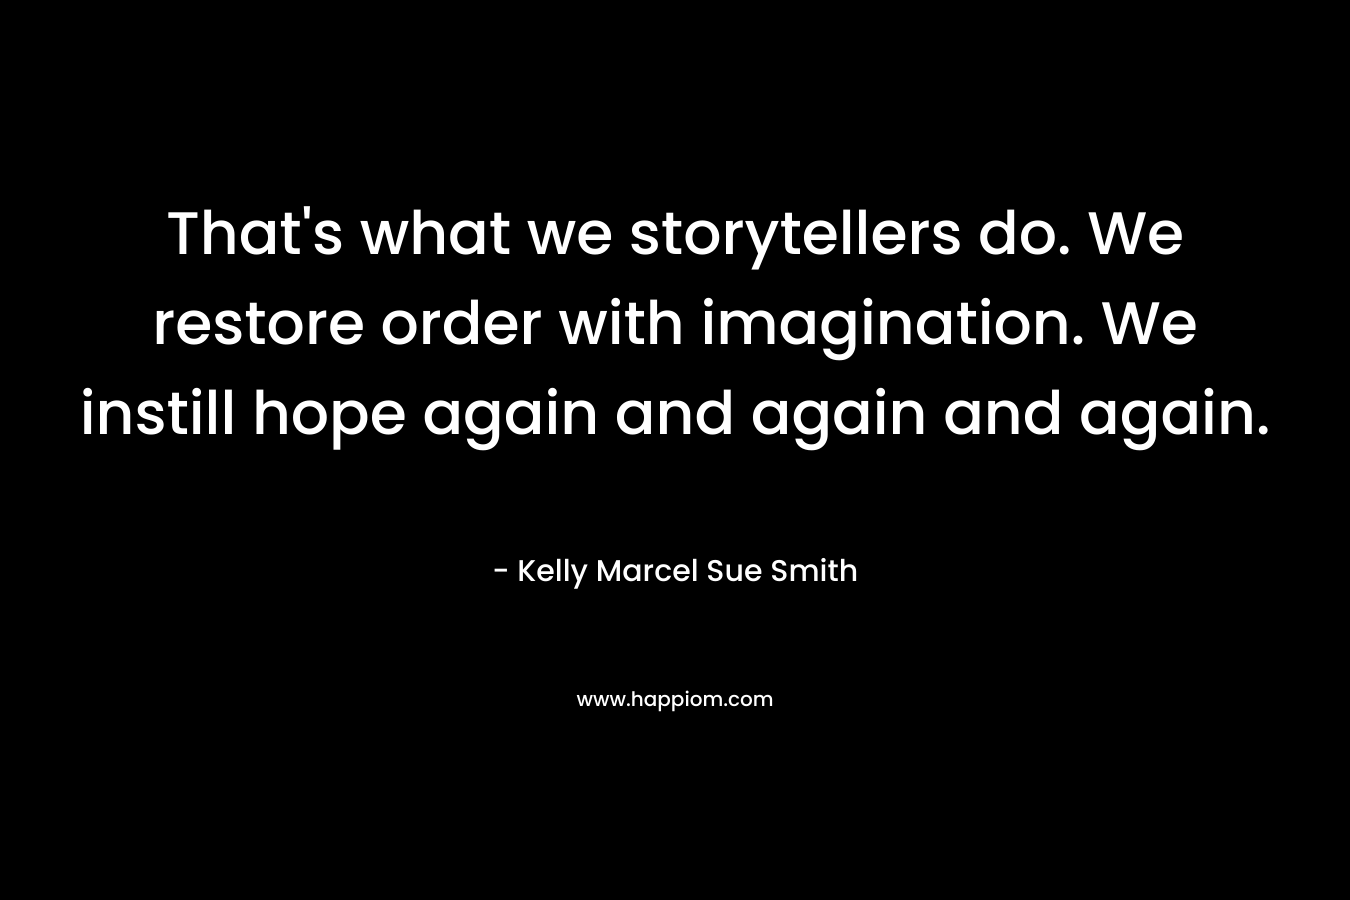 That’s what we storytellers do. We restore order with imagination. We instill hope again and again and again. – Kelly Marcel  Sue Smith